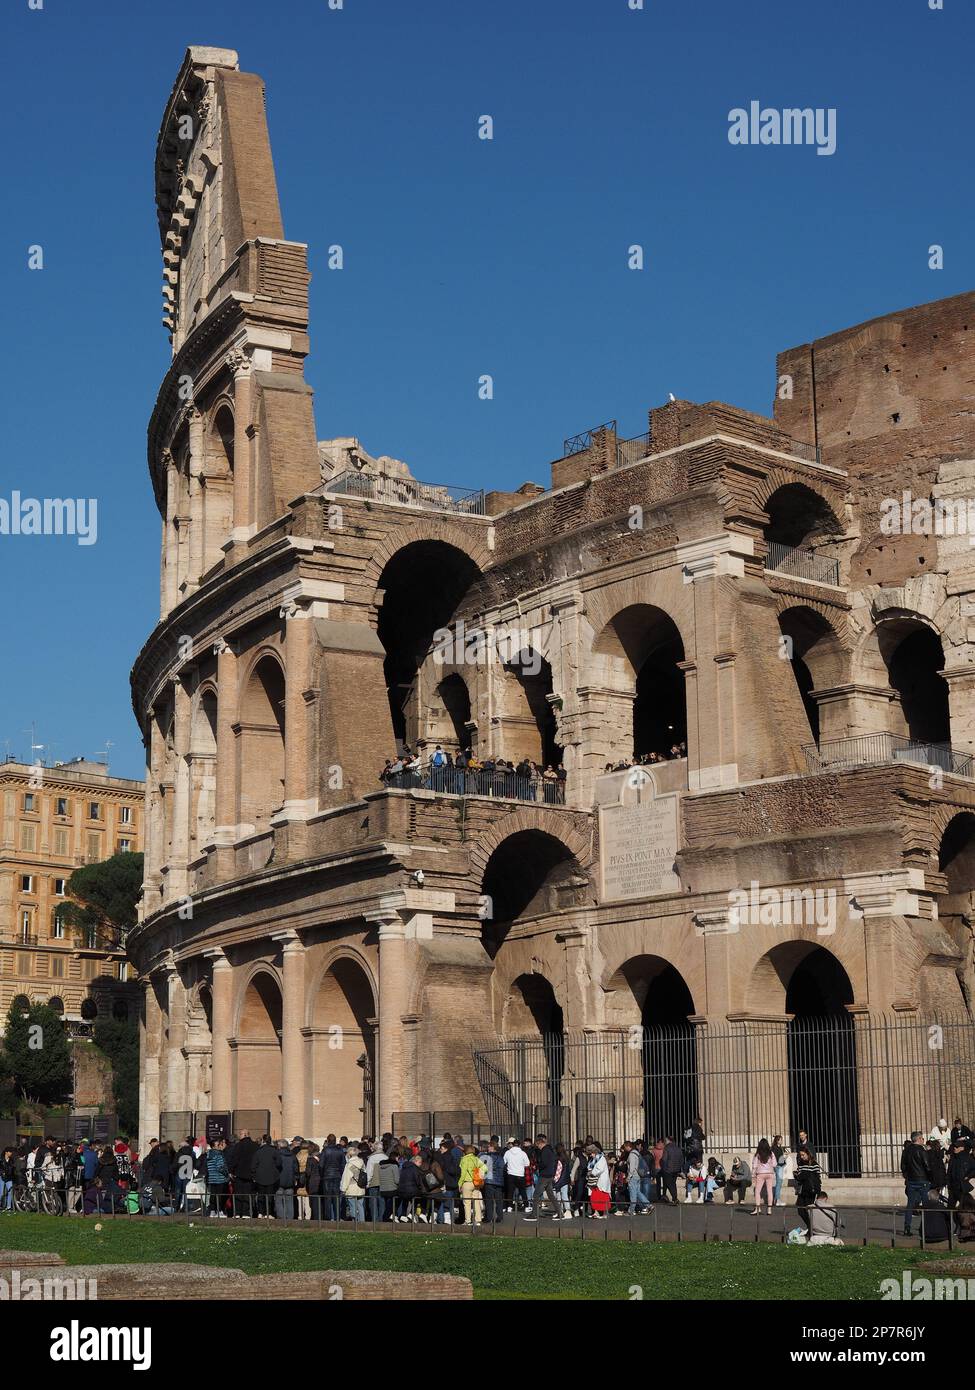 The Colosseum is one of the main tourist attractions in Rome, Italy. This shot shows the structure of the outer rings, with many visitors. The stadium Stock Photo